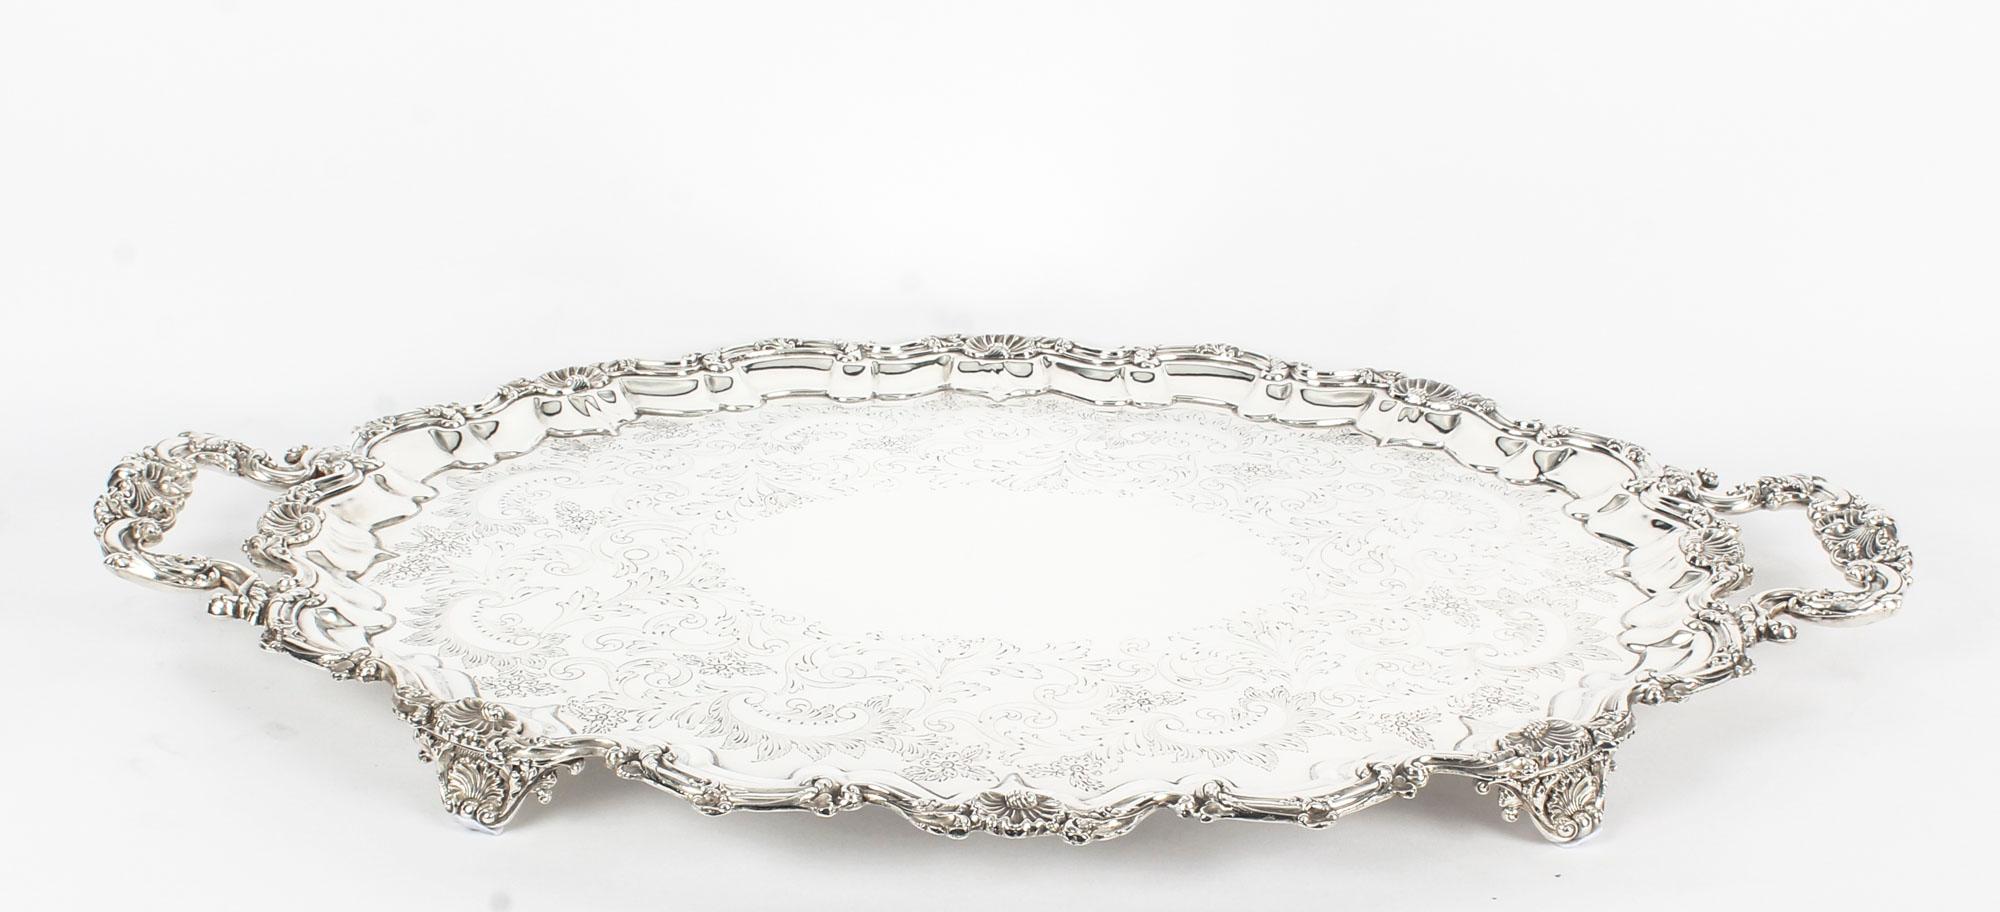 This is a lovely antique large English Victorian silver plated tray with makers marks dating it to circa 1908.

This large oval silver plated tray features fabulous engraved decoration, a deep set decorative reeded border with elegant handles to